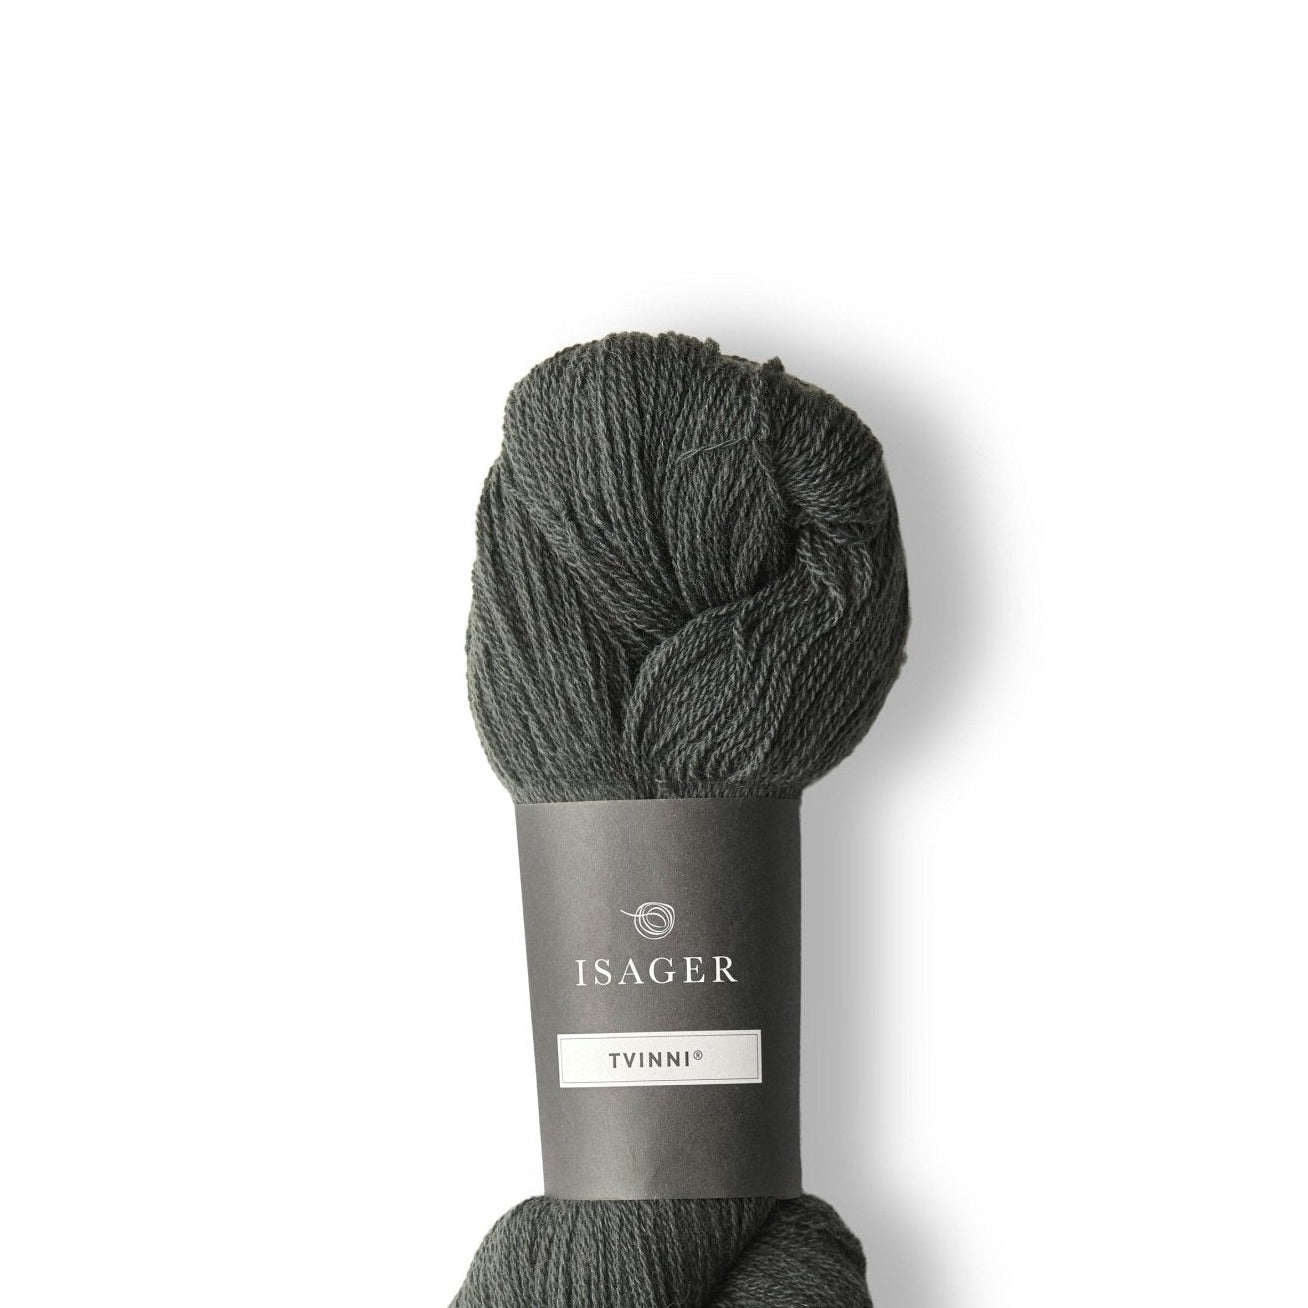 Isager Tvinni - 47 - 4 Ply - Isager - The Little Yarn Store